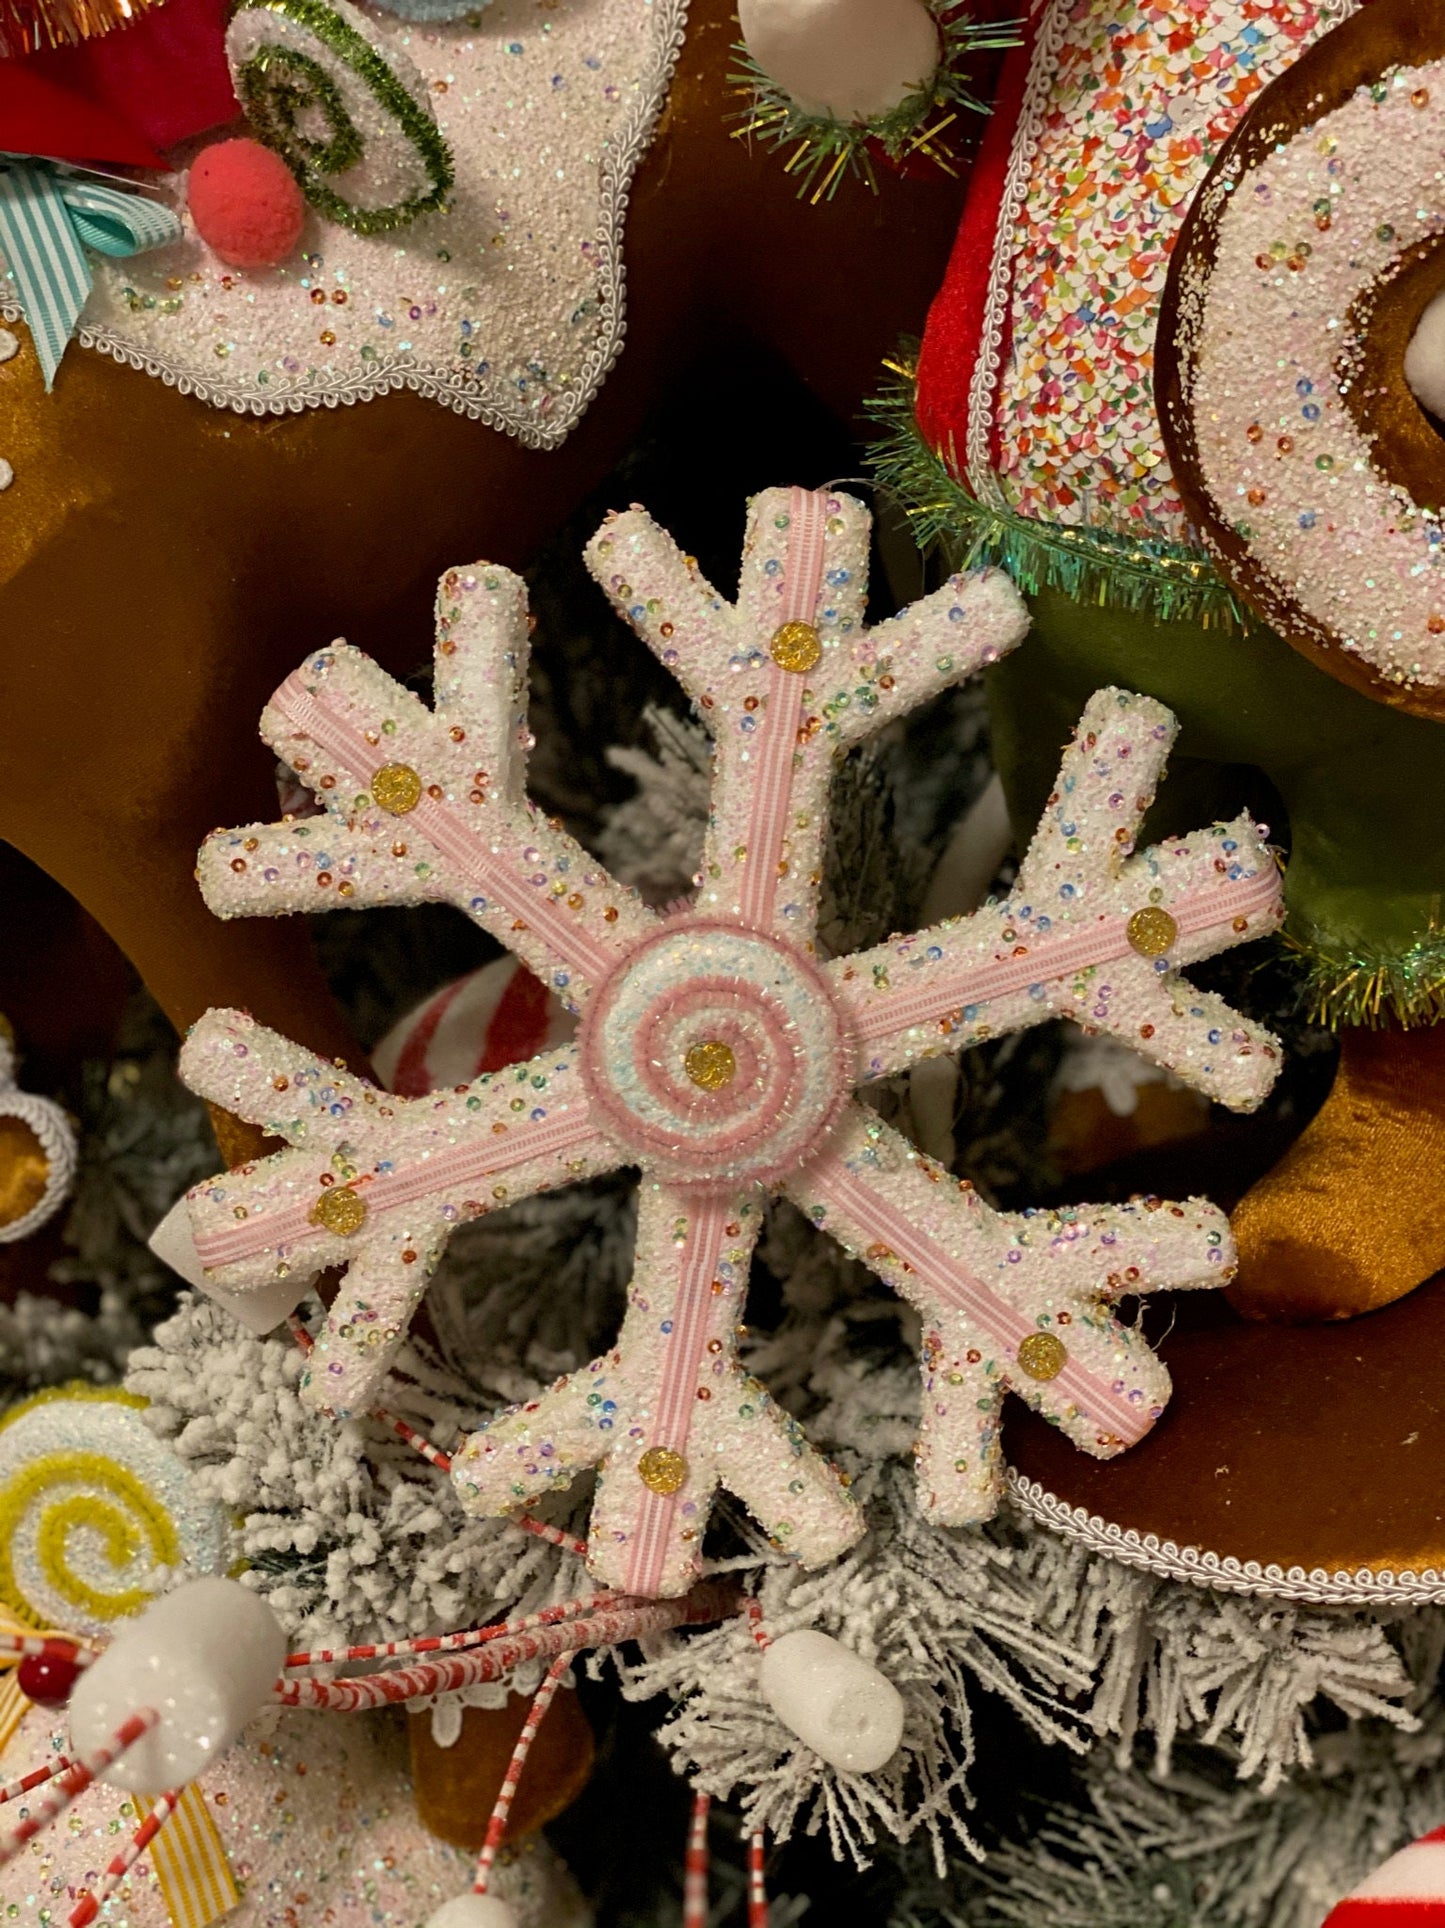 10" Candy sprinkles snowflake ornament